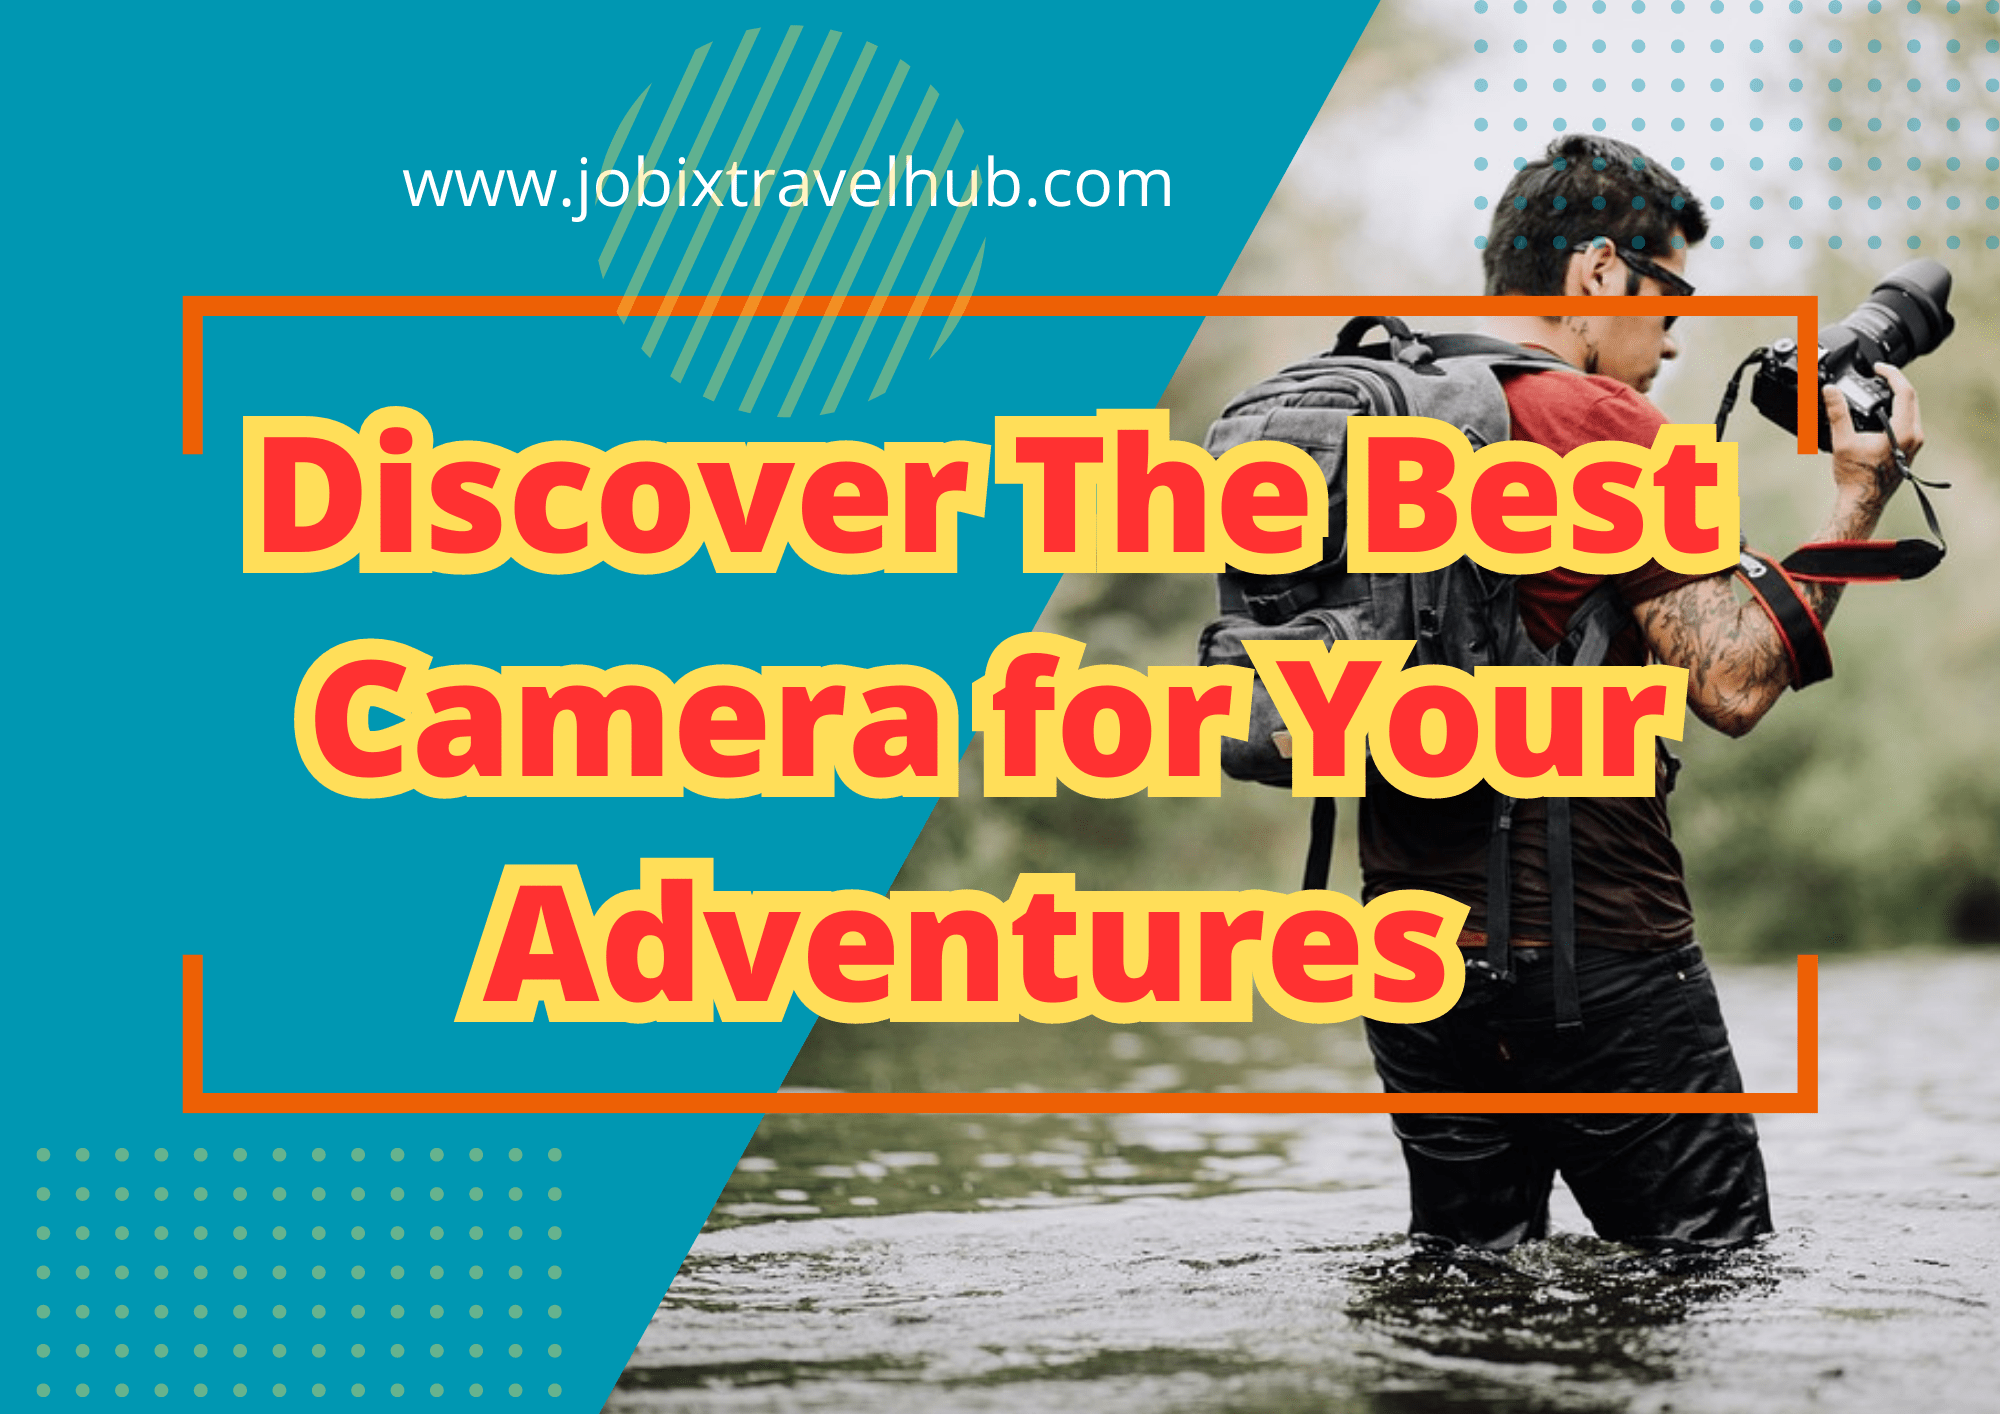 How To Find The Best Camera For Travel - 2023 Discover the best camera for your upcoming adventures in 2023. Are you an adventurous digital traveler looking for the best camera to capture your experiences during your travels? Whether you're taking photographs for business, pleasure, or art, having the perfect travel companion is essential. With so many options on the market today, choosing the best camera for your travels can be overwhelming—and nobody wants to invest in a sub-par choice!